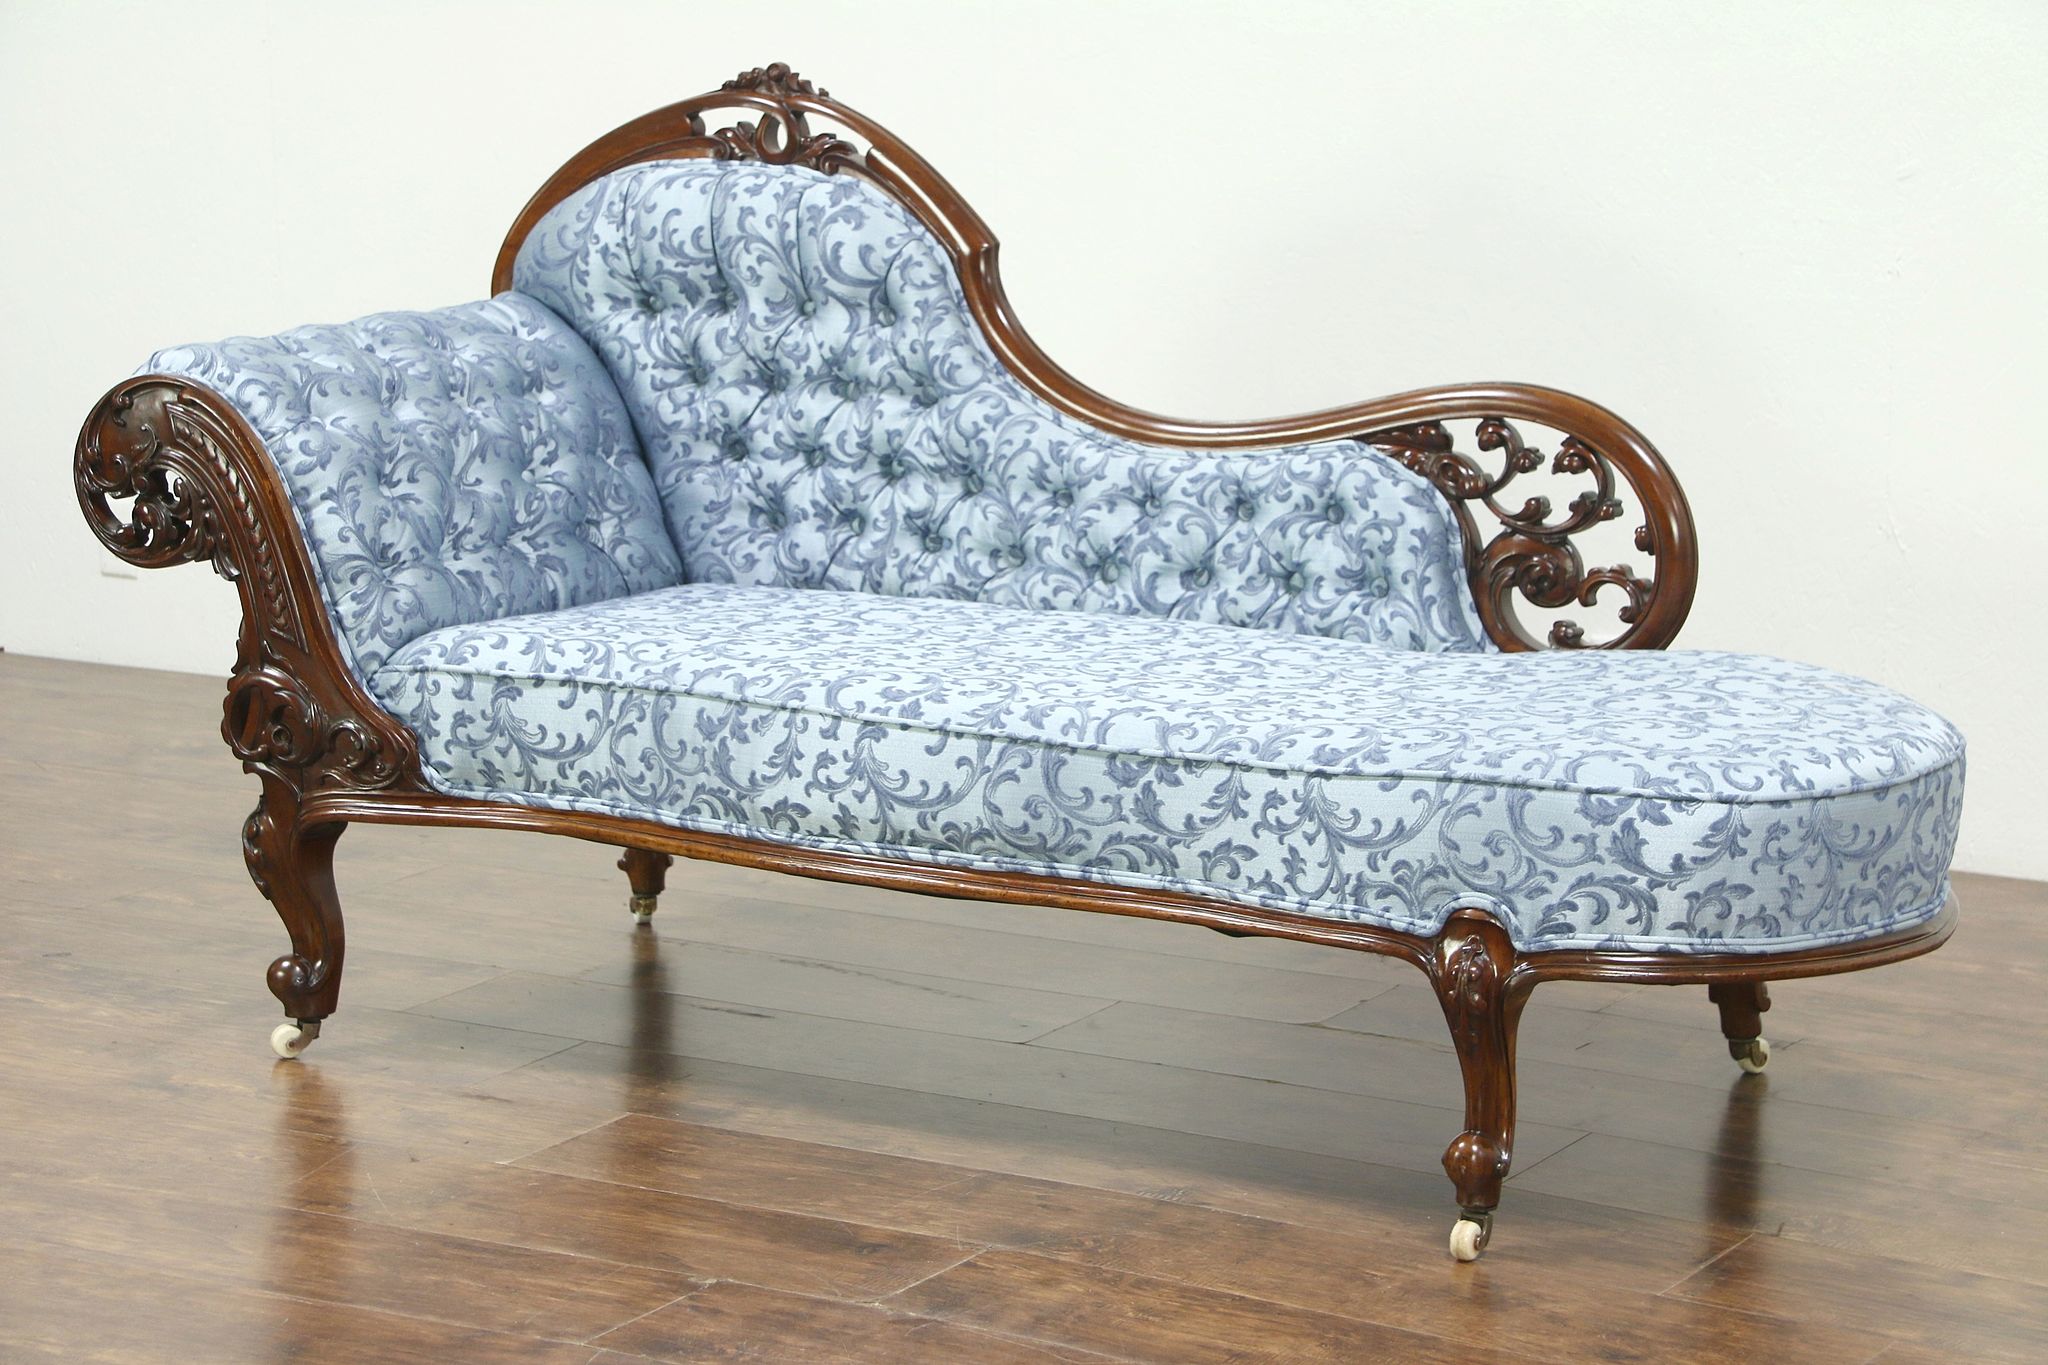 Carved Mahogany Antique Recamier Chaise Or Fainting Couch England